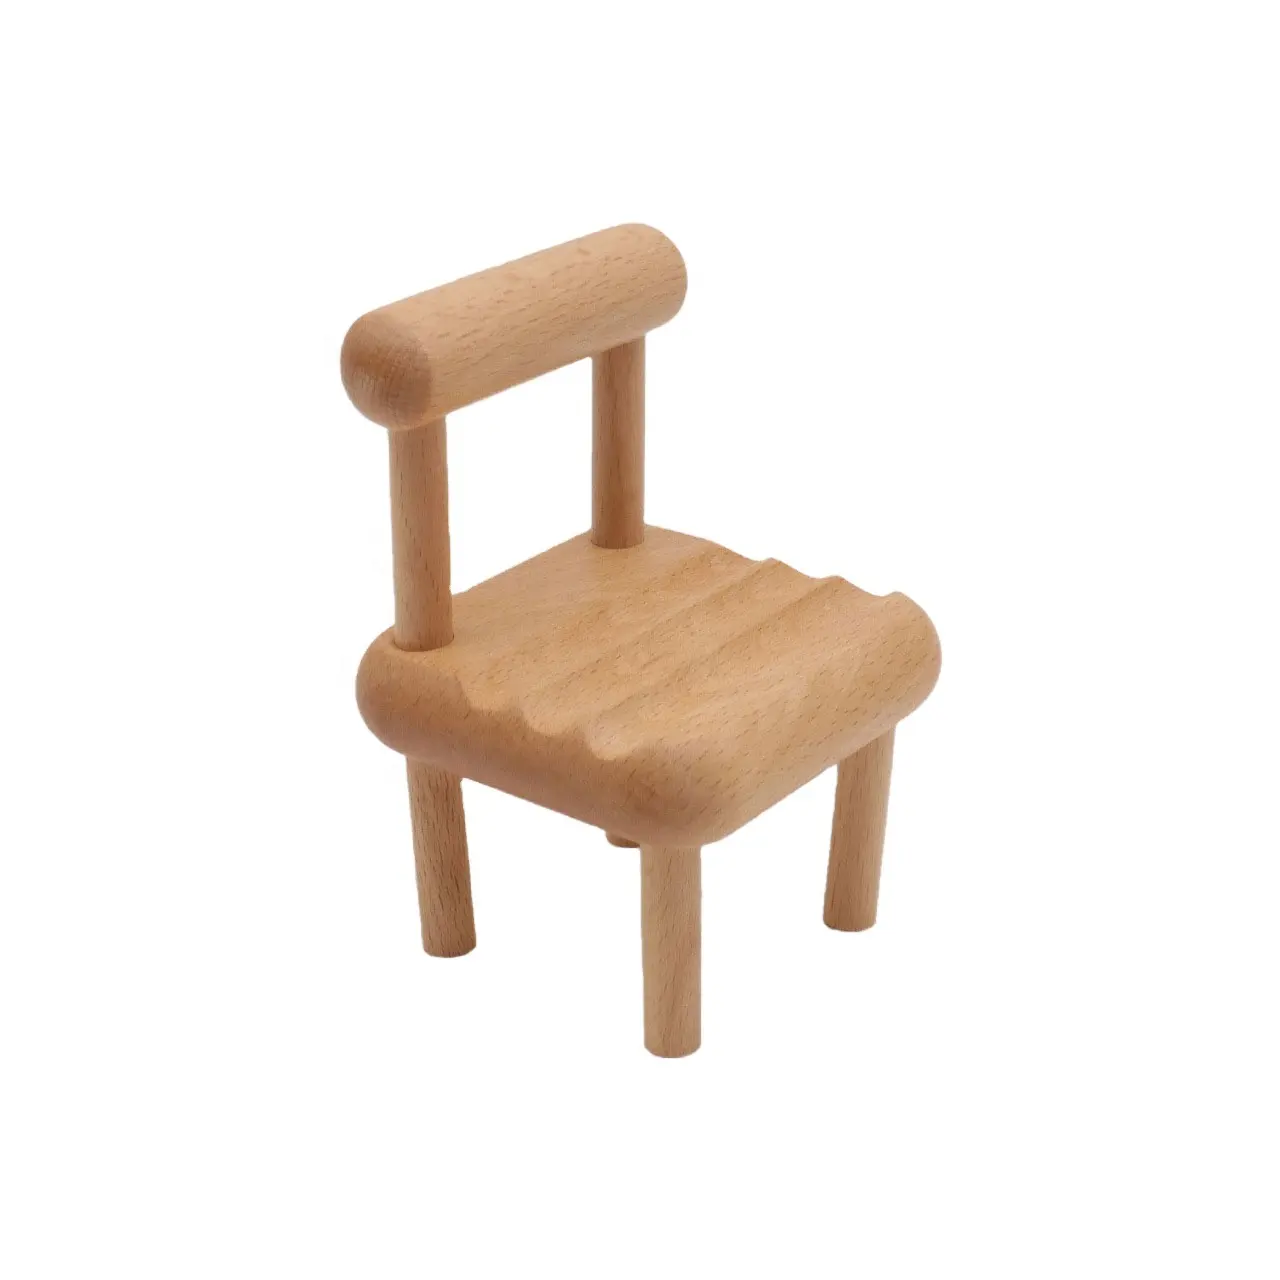 Solid Wood Mobile Phone Holder Beech Chair Mobile Phone Base Creative Mini Chair Small Ornaments Wood Base